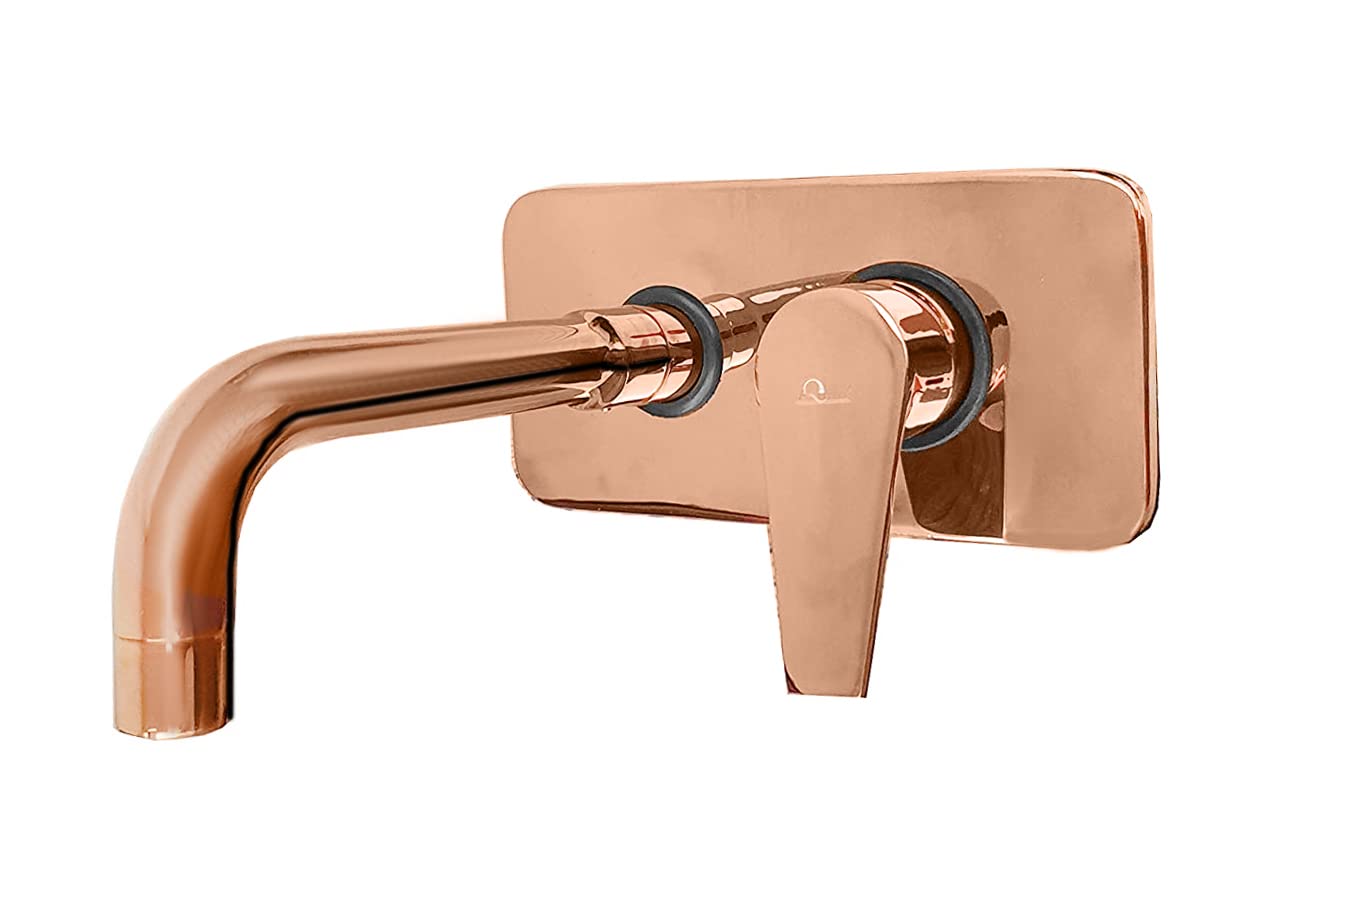 Aquieen Luxury Series Extended Body Hot & Cold Basin Mixer Basin Tap (Wall Mounted - Entice Rose Gold)